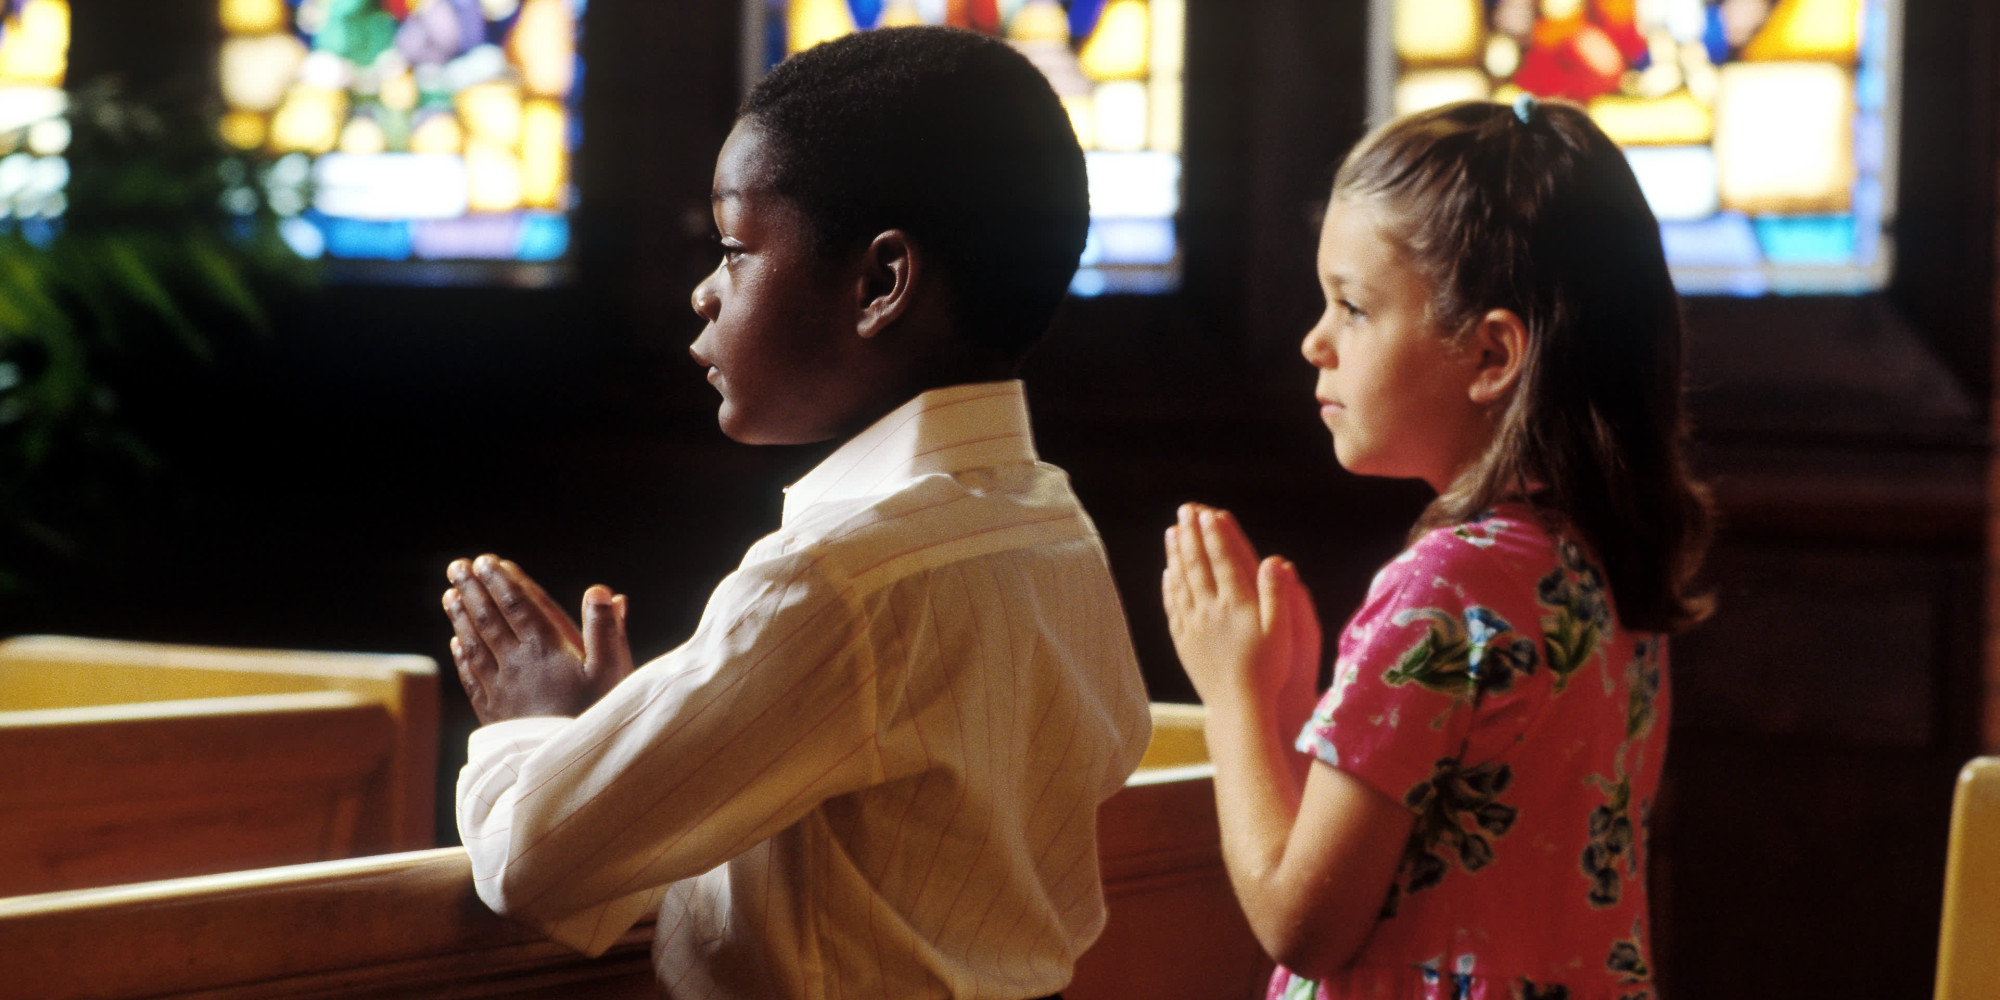 Southern Baptist Leaders Call For Integrated Churches | HuffPost